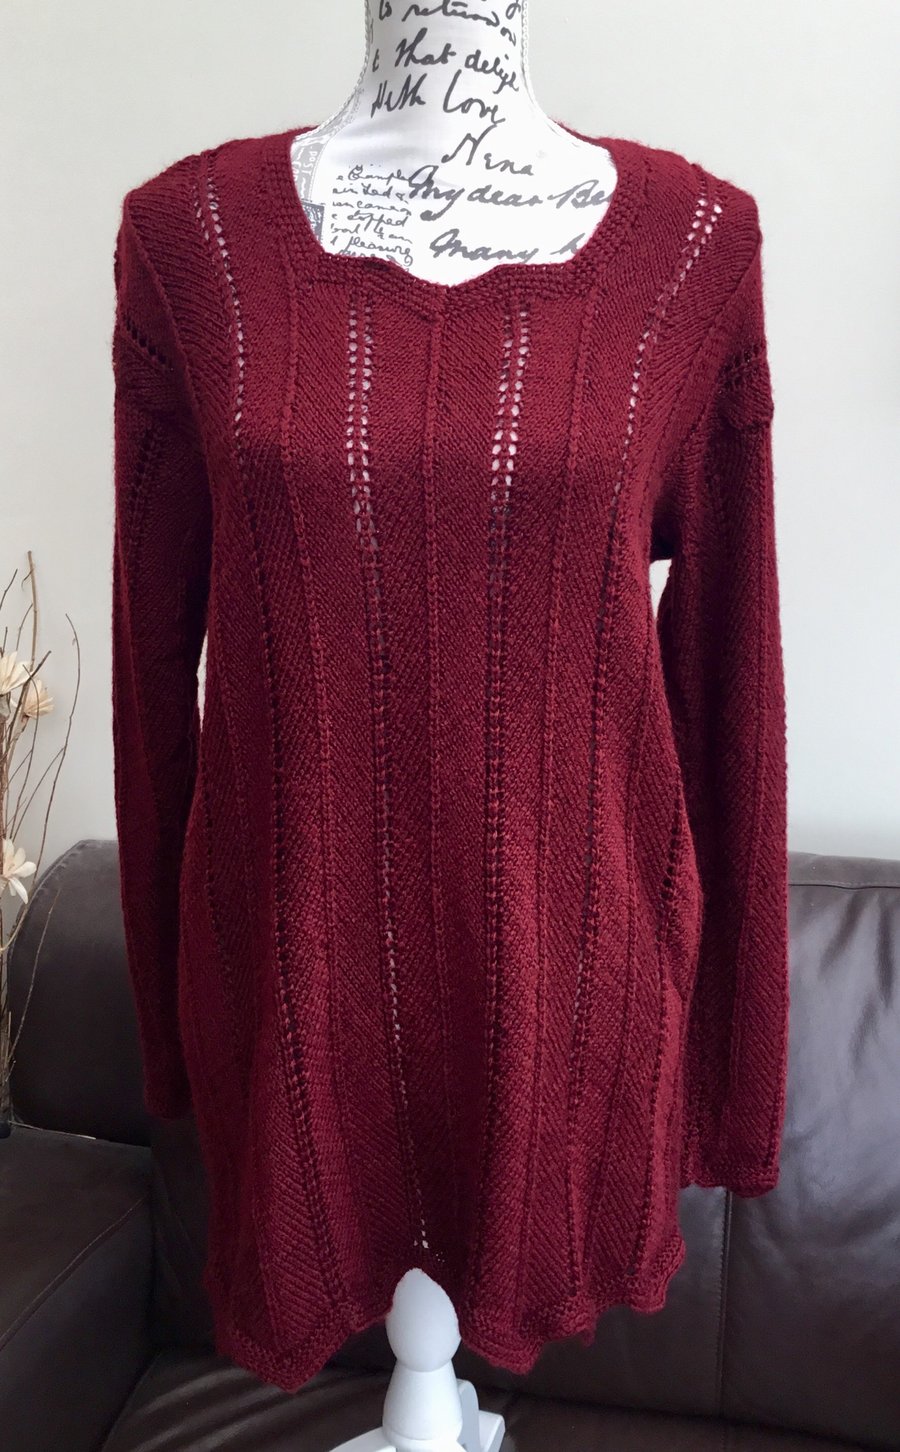 Long Line Lacy Knit Burgundy Ladies Hand Knitted Jumper UK size 12 to 14.